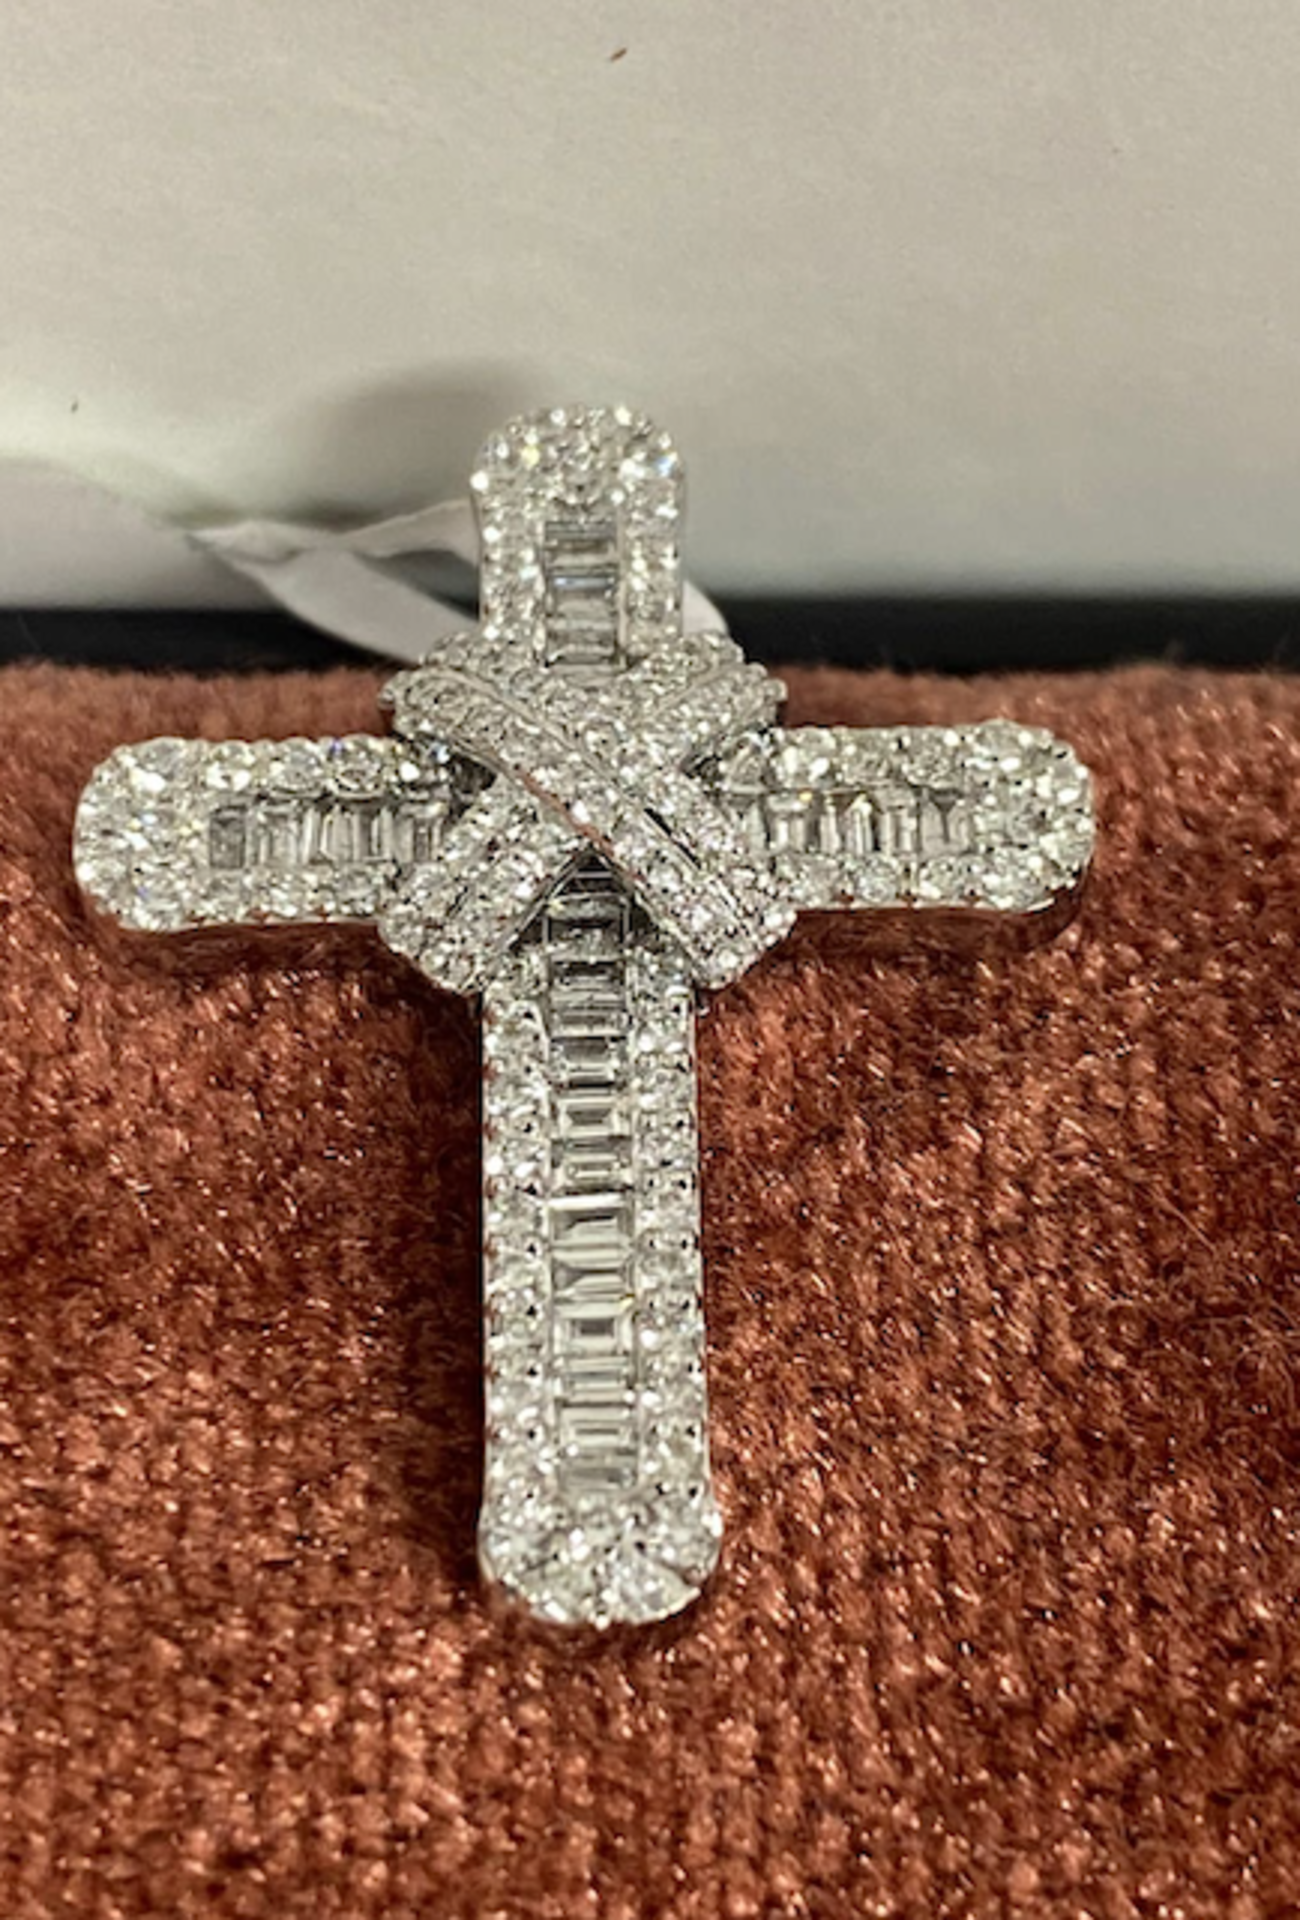 RRP £2000 Diamond Cross .78ct Diamonds. 3.85g of White Gold. Size 26mm by 20mm (Appraisals Available